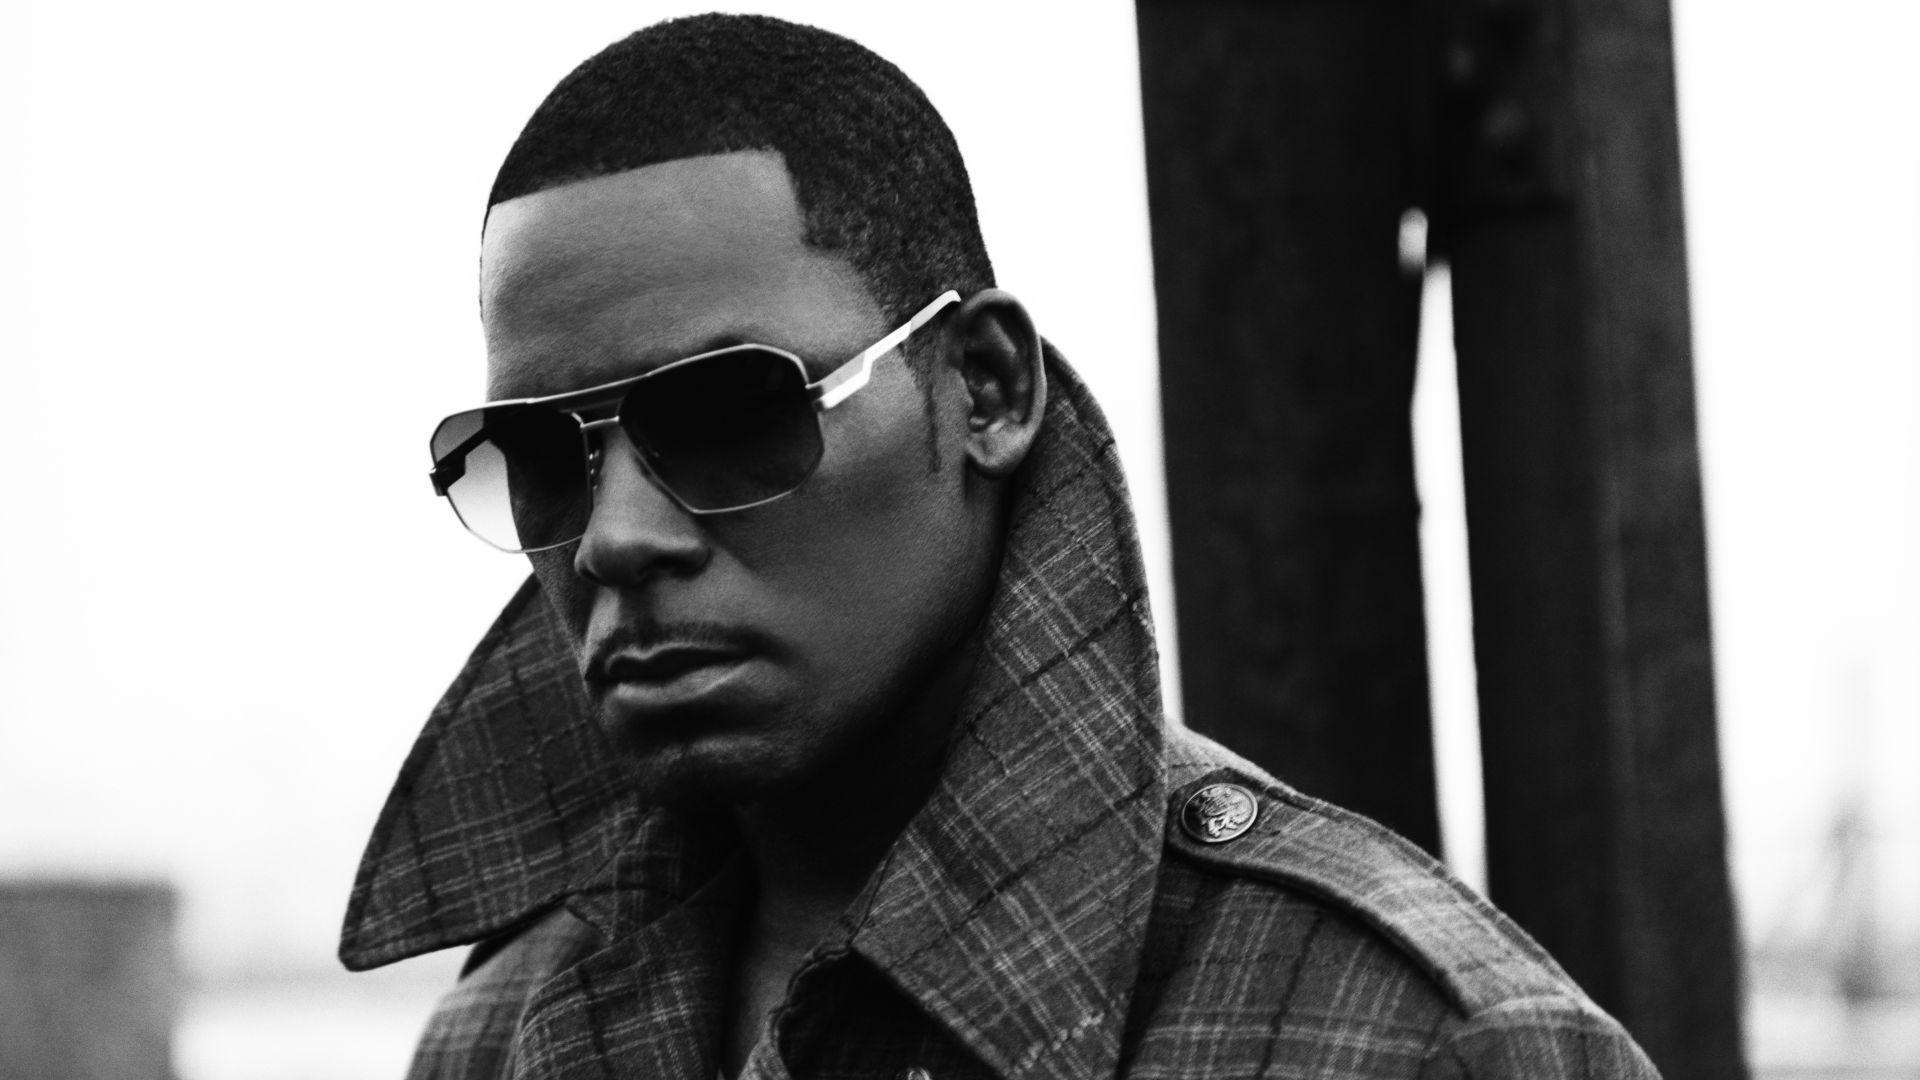 Music from the 90s image R. Kelly HD wallpaper and background